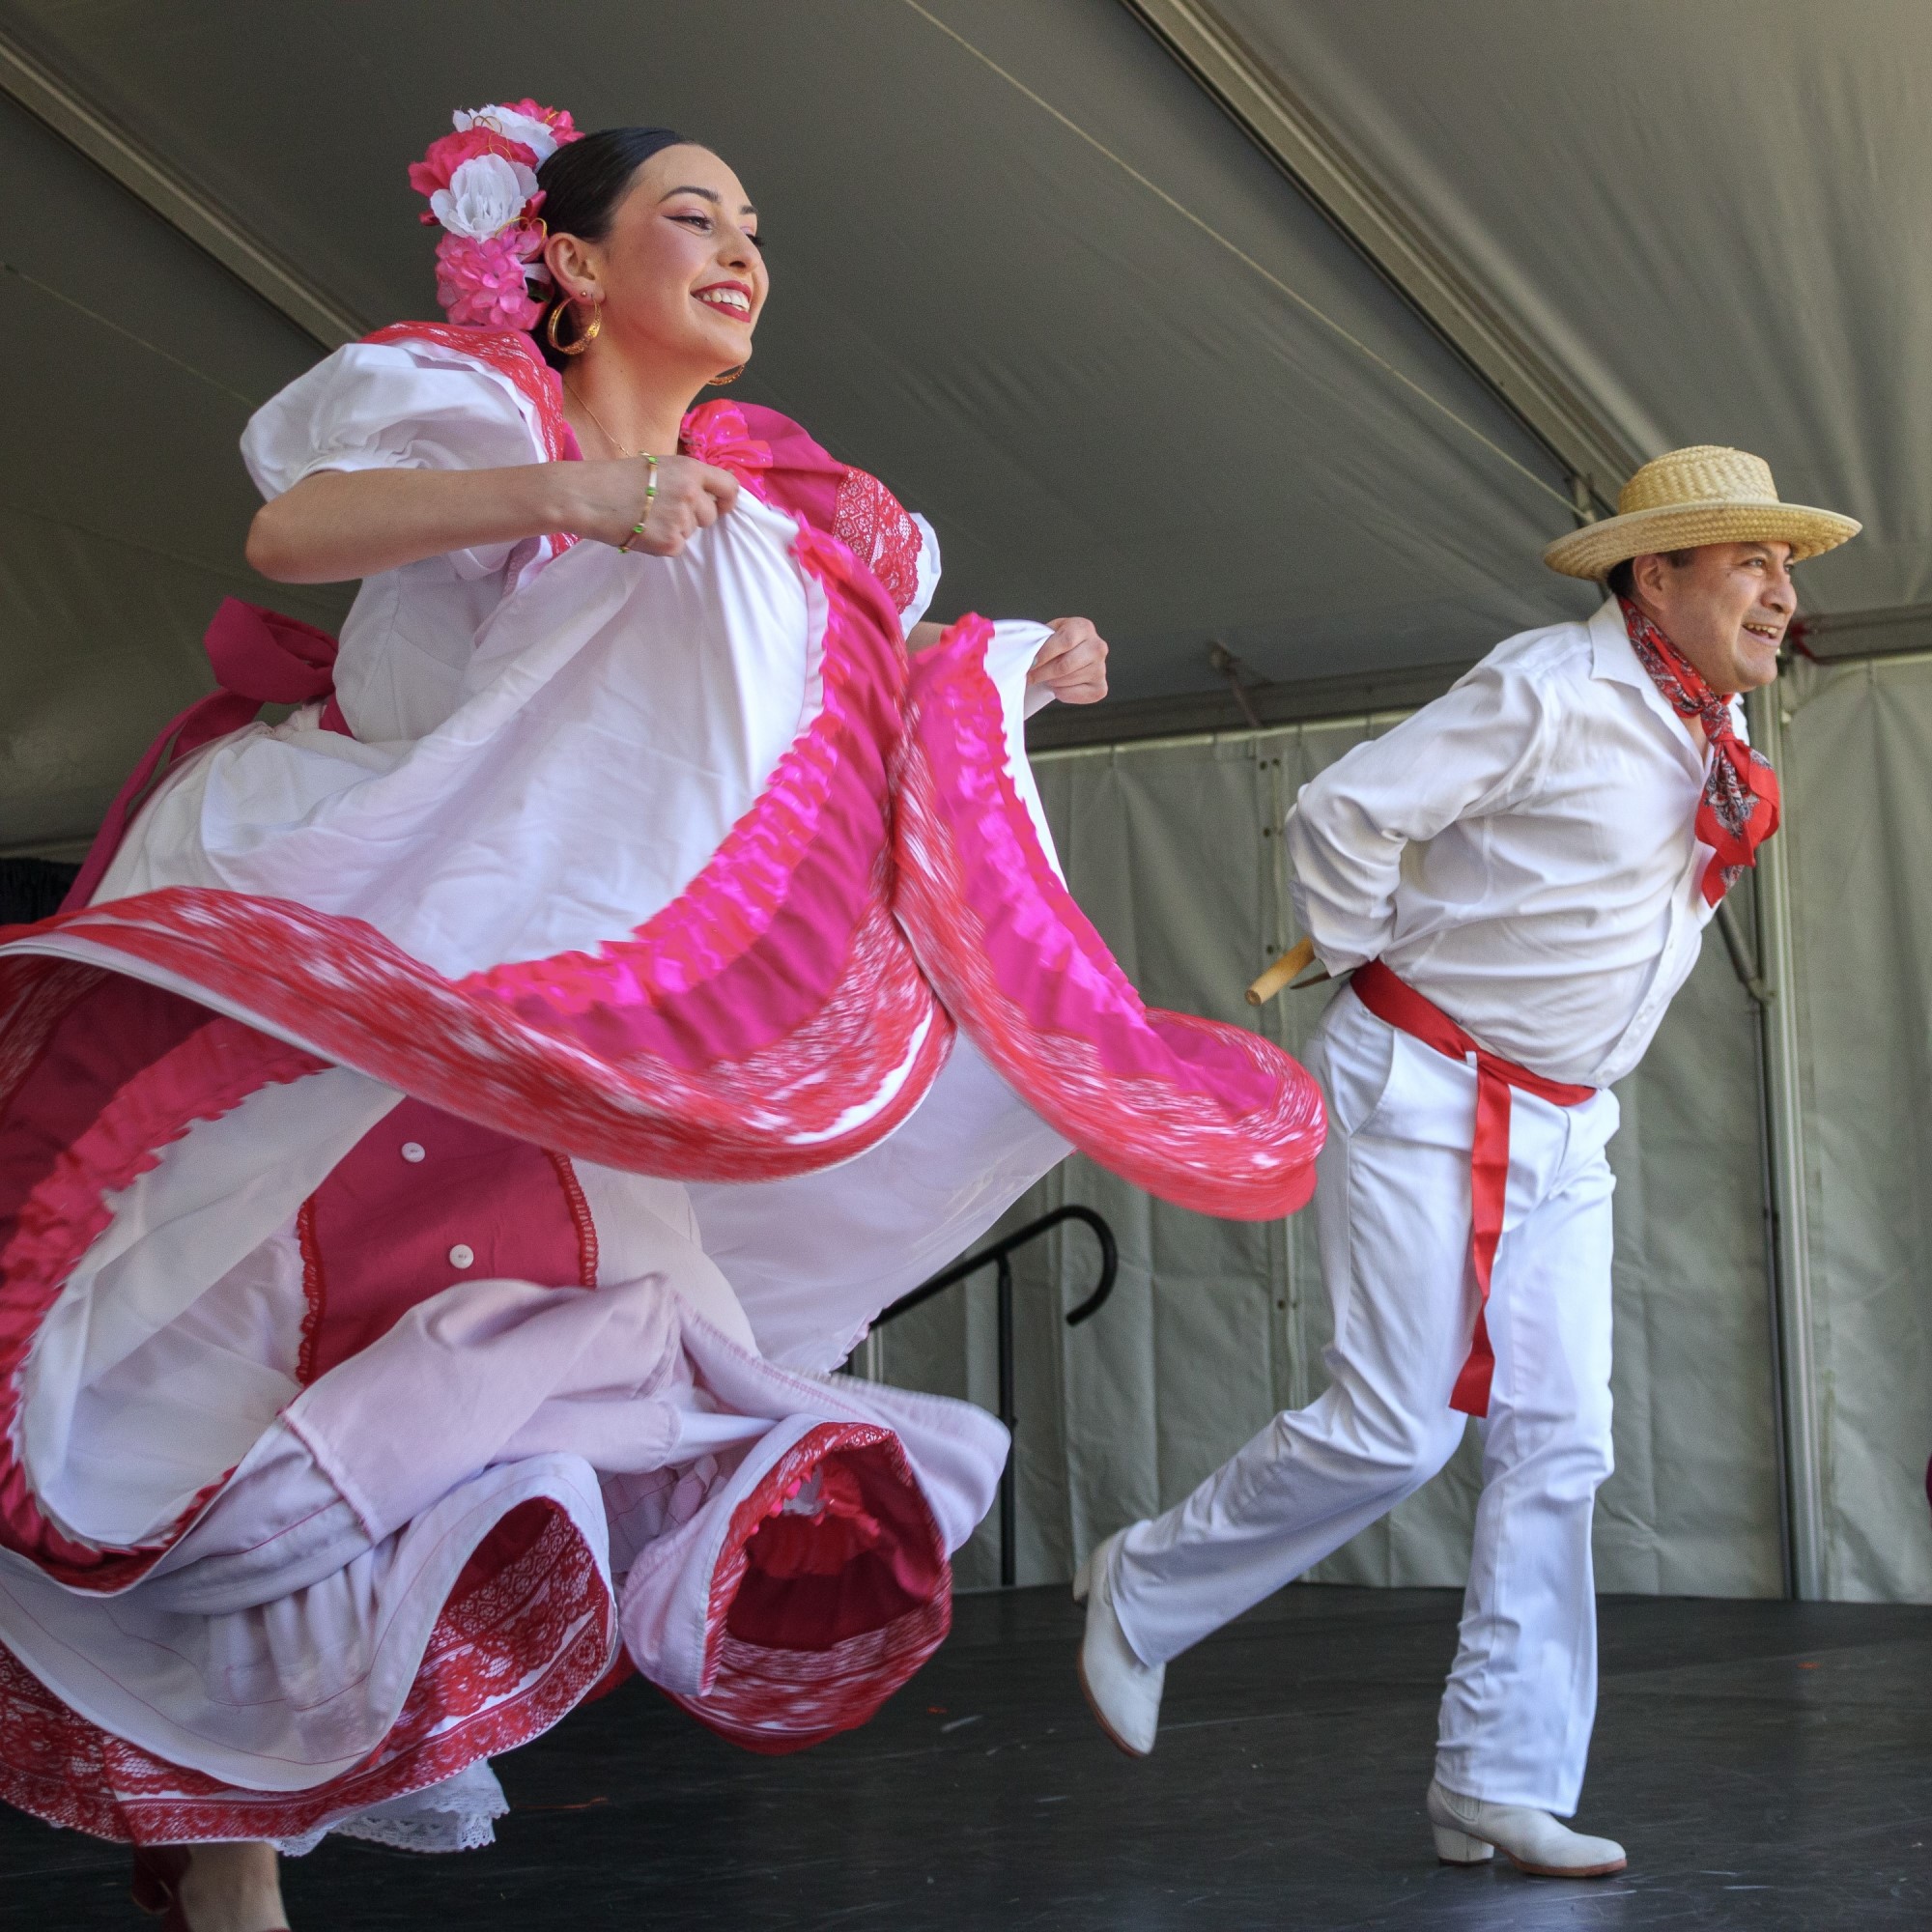 The image depicts a man and woman dancing in a Mexico Vivo Folklore setting. They are dressed in traditional costumes and are engaging in a dance performance.  Speak  Copy Hover for secret coupon code  Schedule Posts with Pallyy  Simple. Affordable. Incredibly powerful. Pallyy offers feature-rich social media management and scheduling without the price tag.  🚀 Schedule to all social media platforms 💬 Create captions in your tone with AI 💌 Social inbox, analytics & much more Get Started → free forever, no